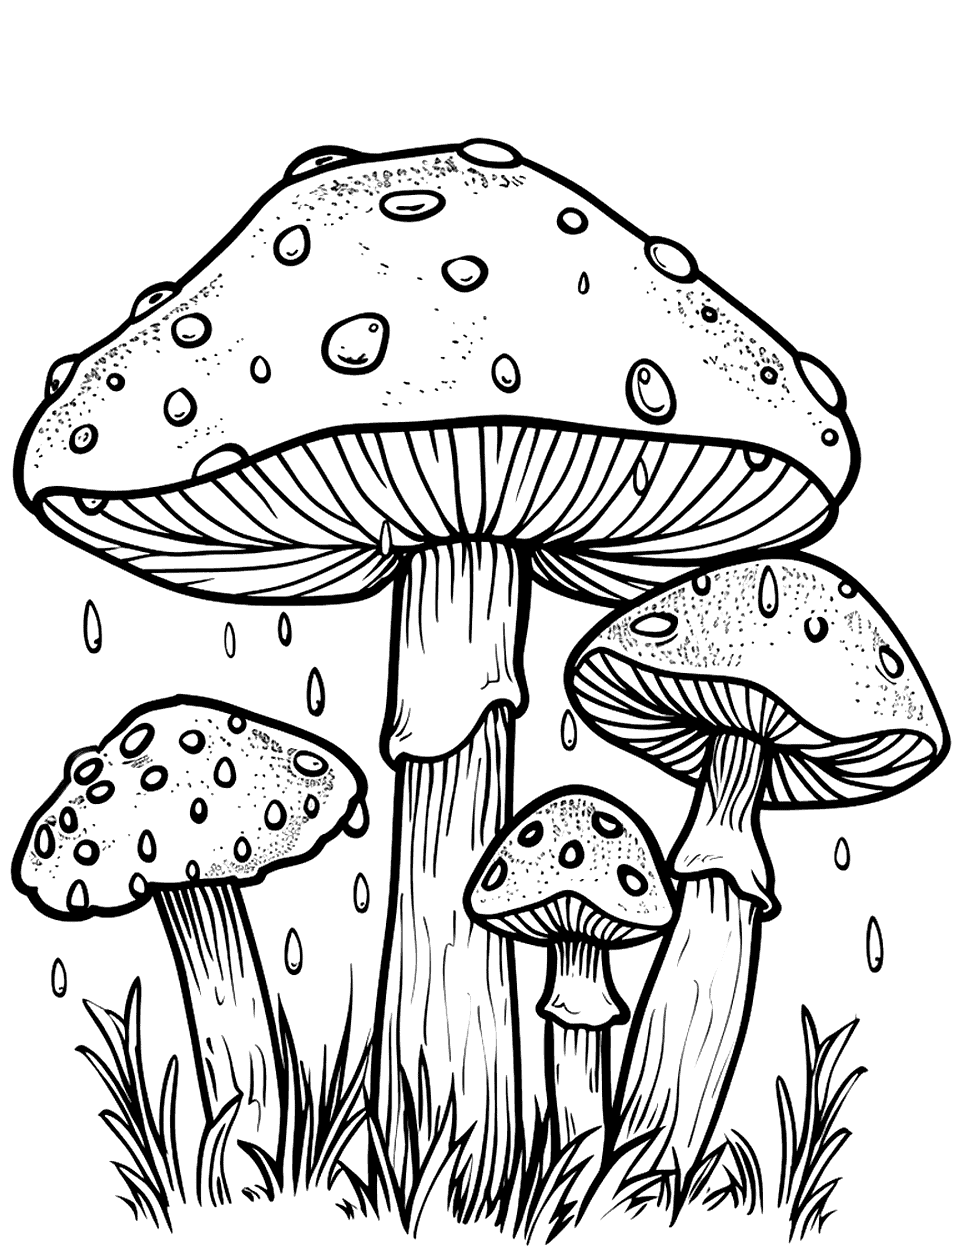 Rain Drops on Mushrooms Mushroom Coloring Page - Mushrooms of various shapes with raindrops glistening on their caps.